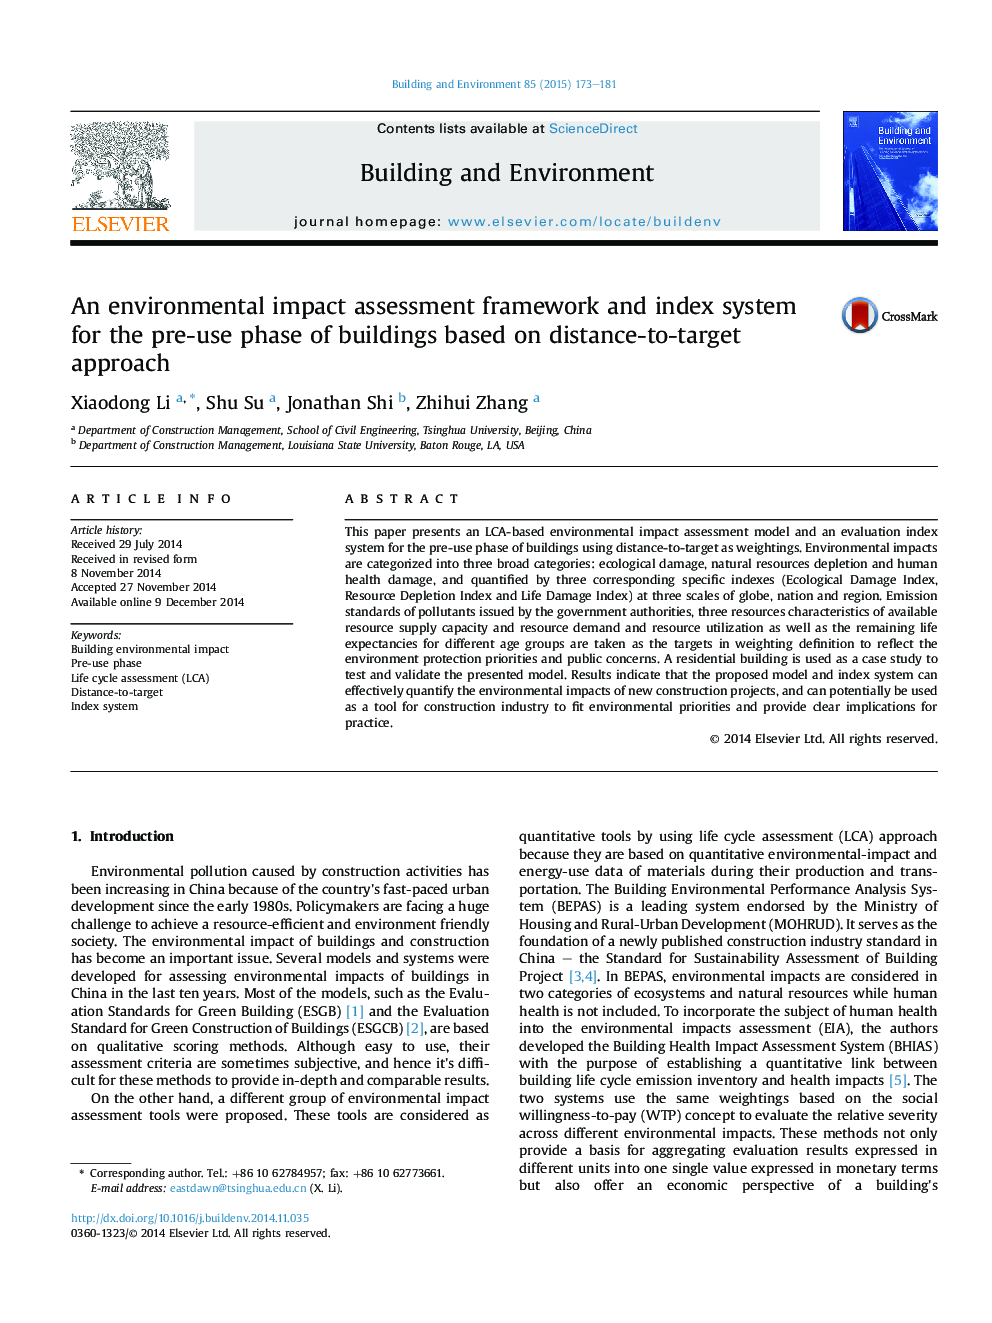 An environmental impact assessment framework and index system for the pre-use phase of buildings based on distance-to-target approach